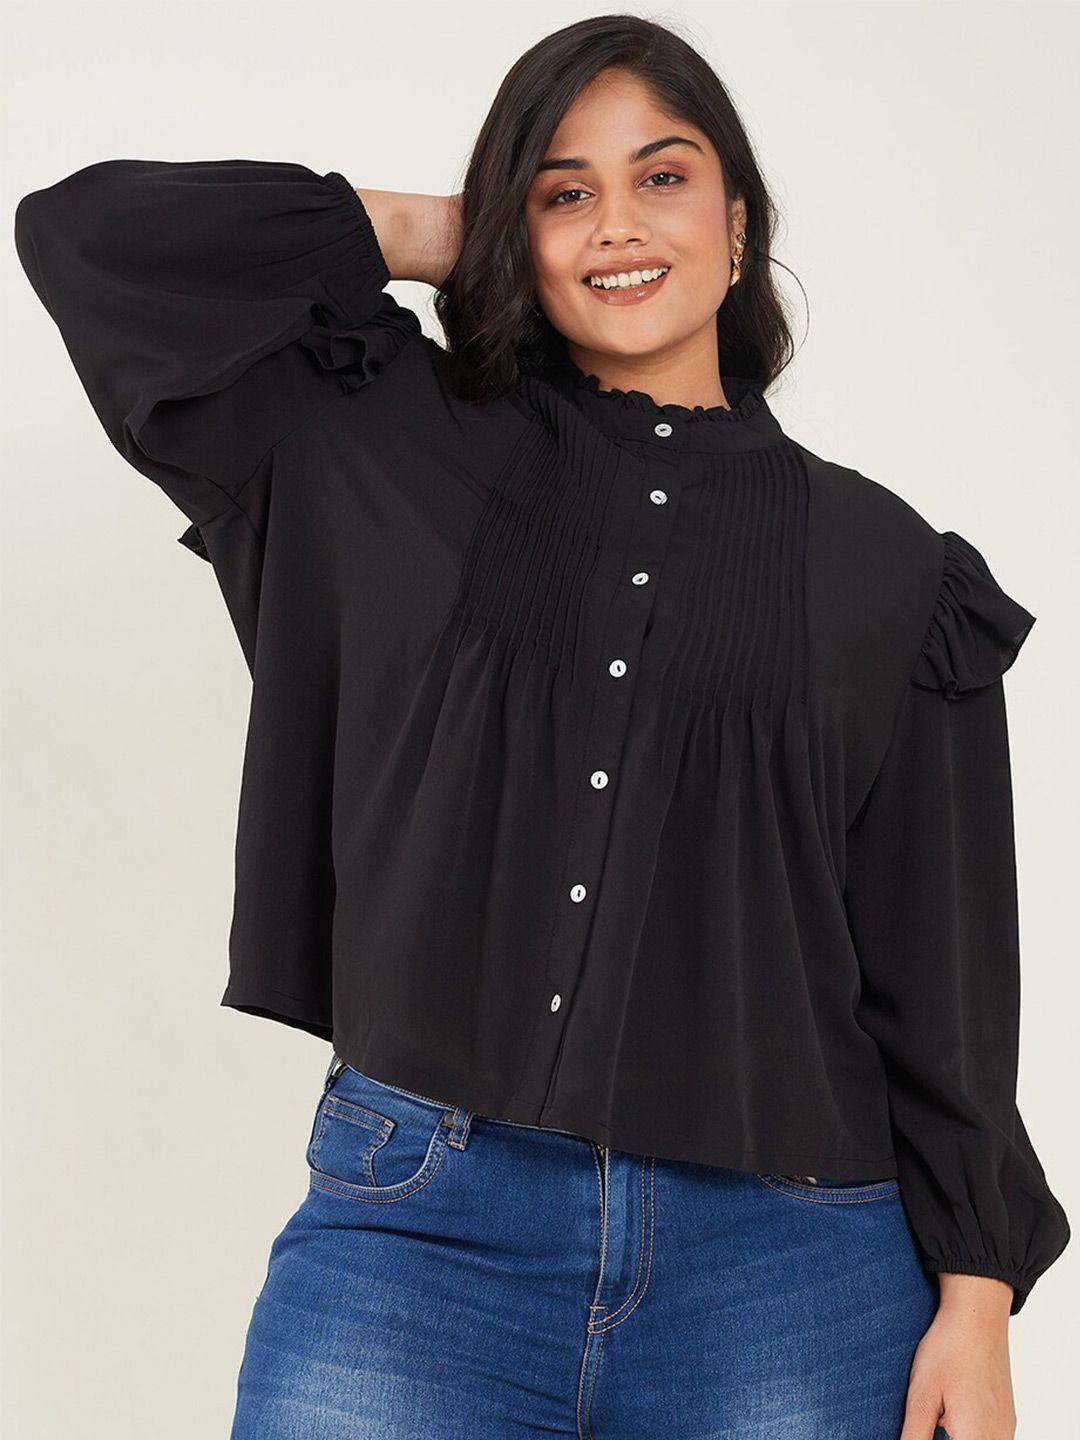 curve by kassually black high neck puff sleeves shirt style top